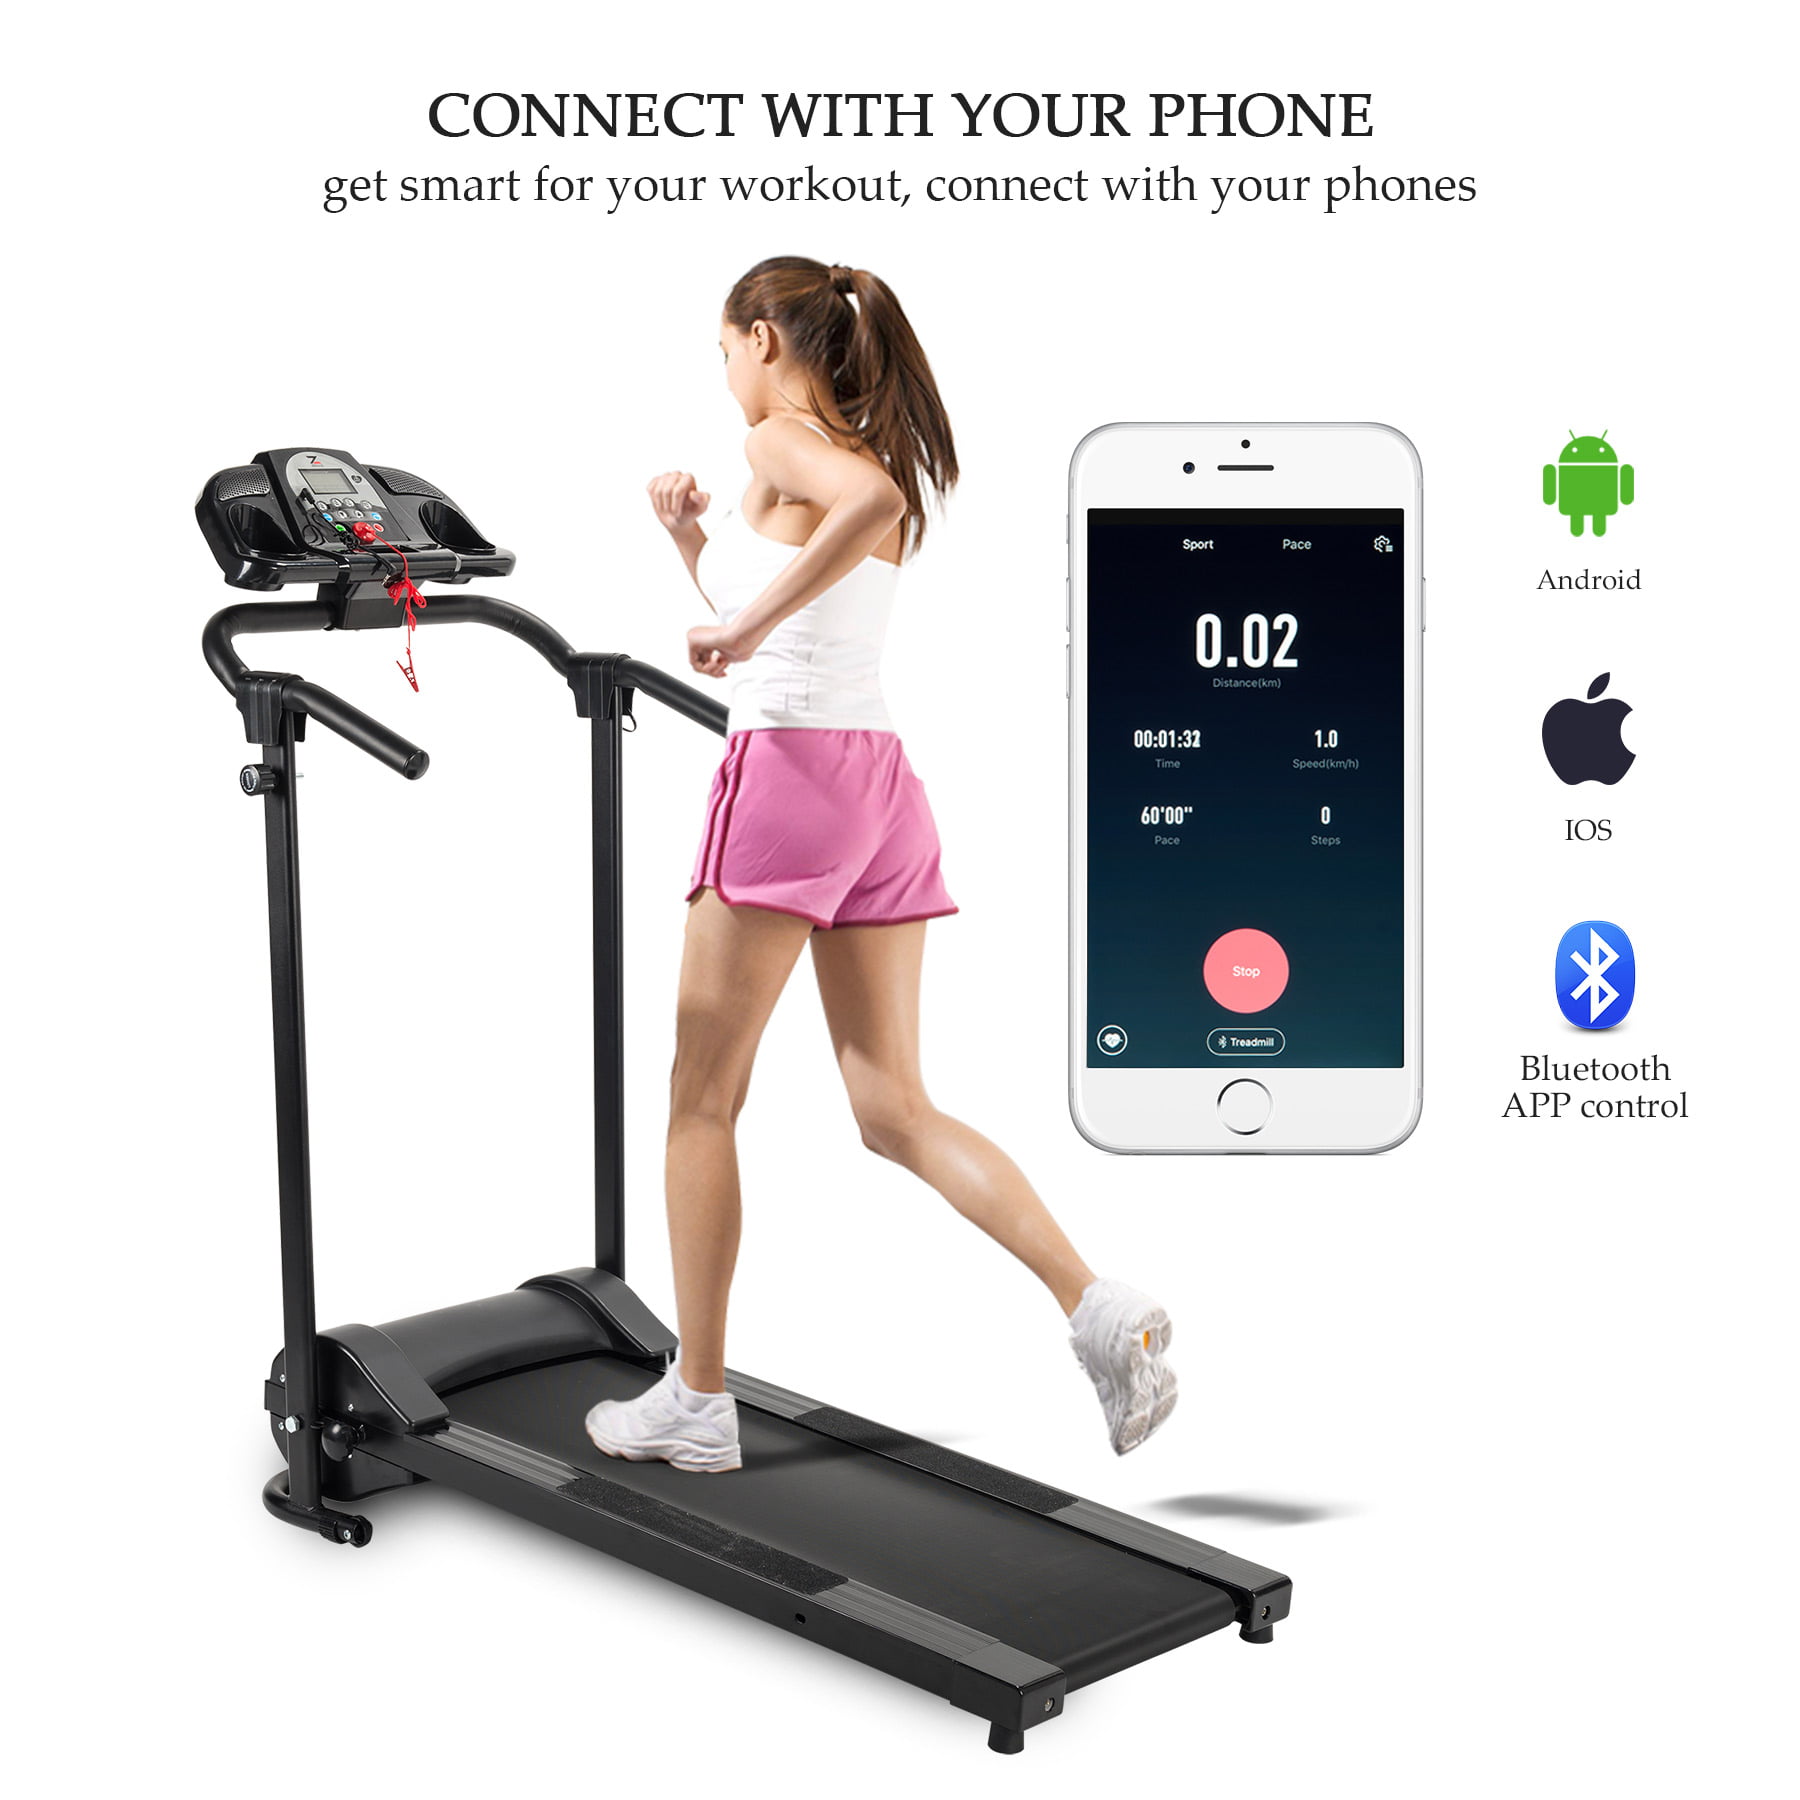 Akonza Heavy Duty Foldable LCD Display Power Electric Running Fitness Treadmill w/ MP3 Phone and 2 Cup Holders 